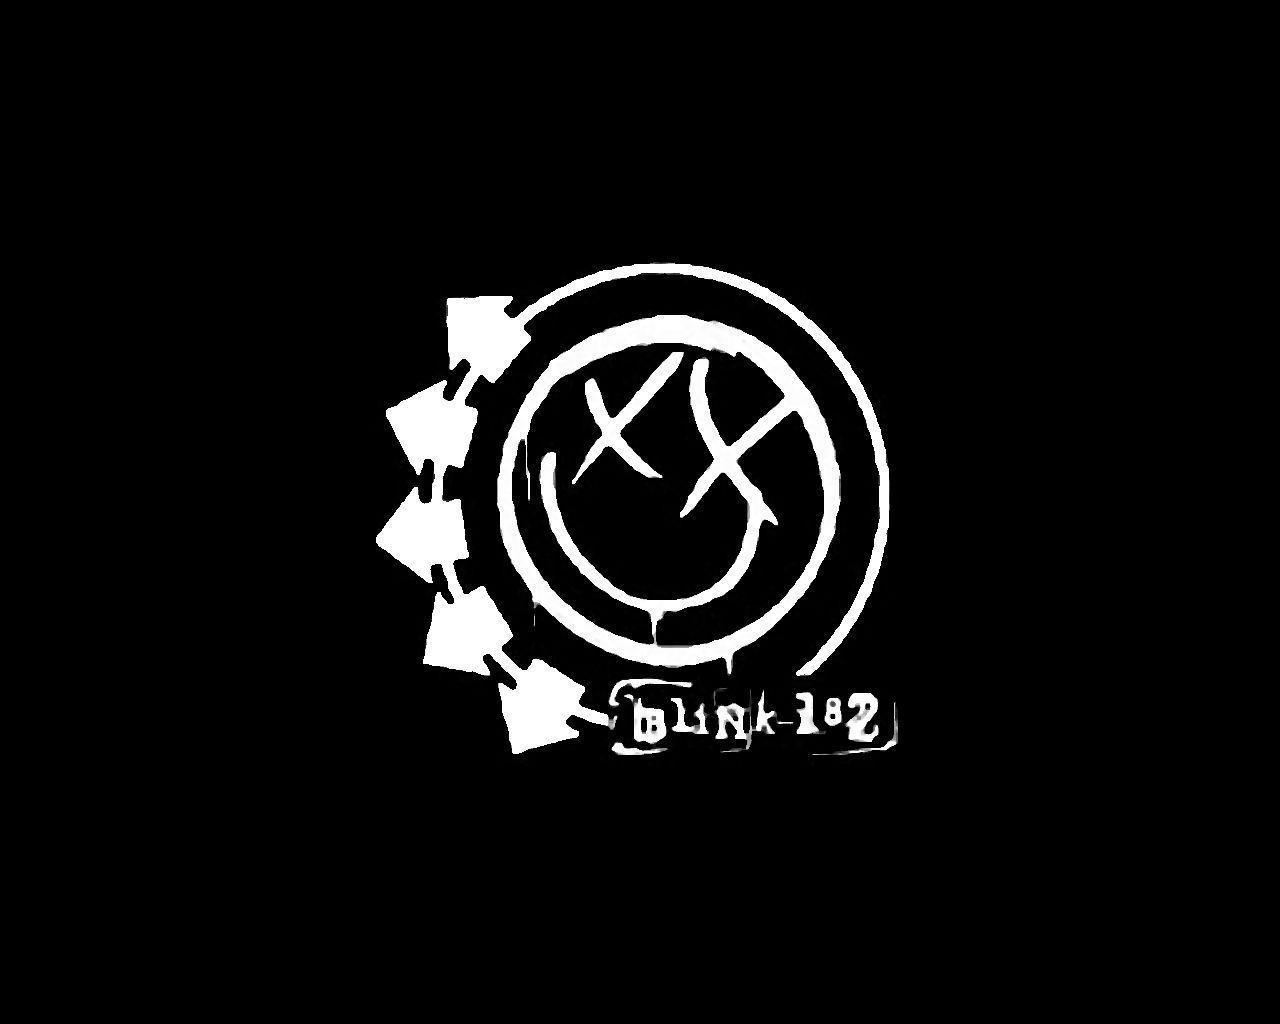 Wallpapers For > Blink 182 Wallpapers Hd